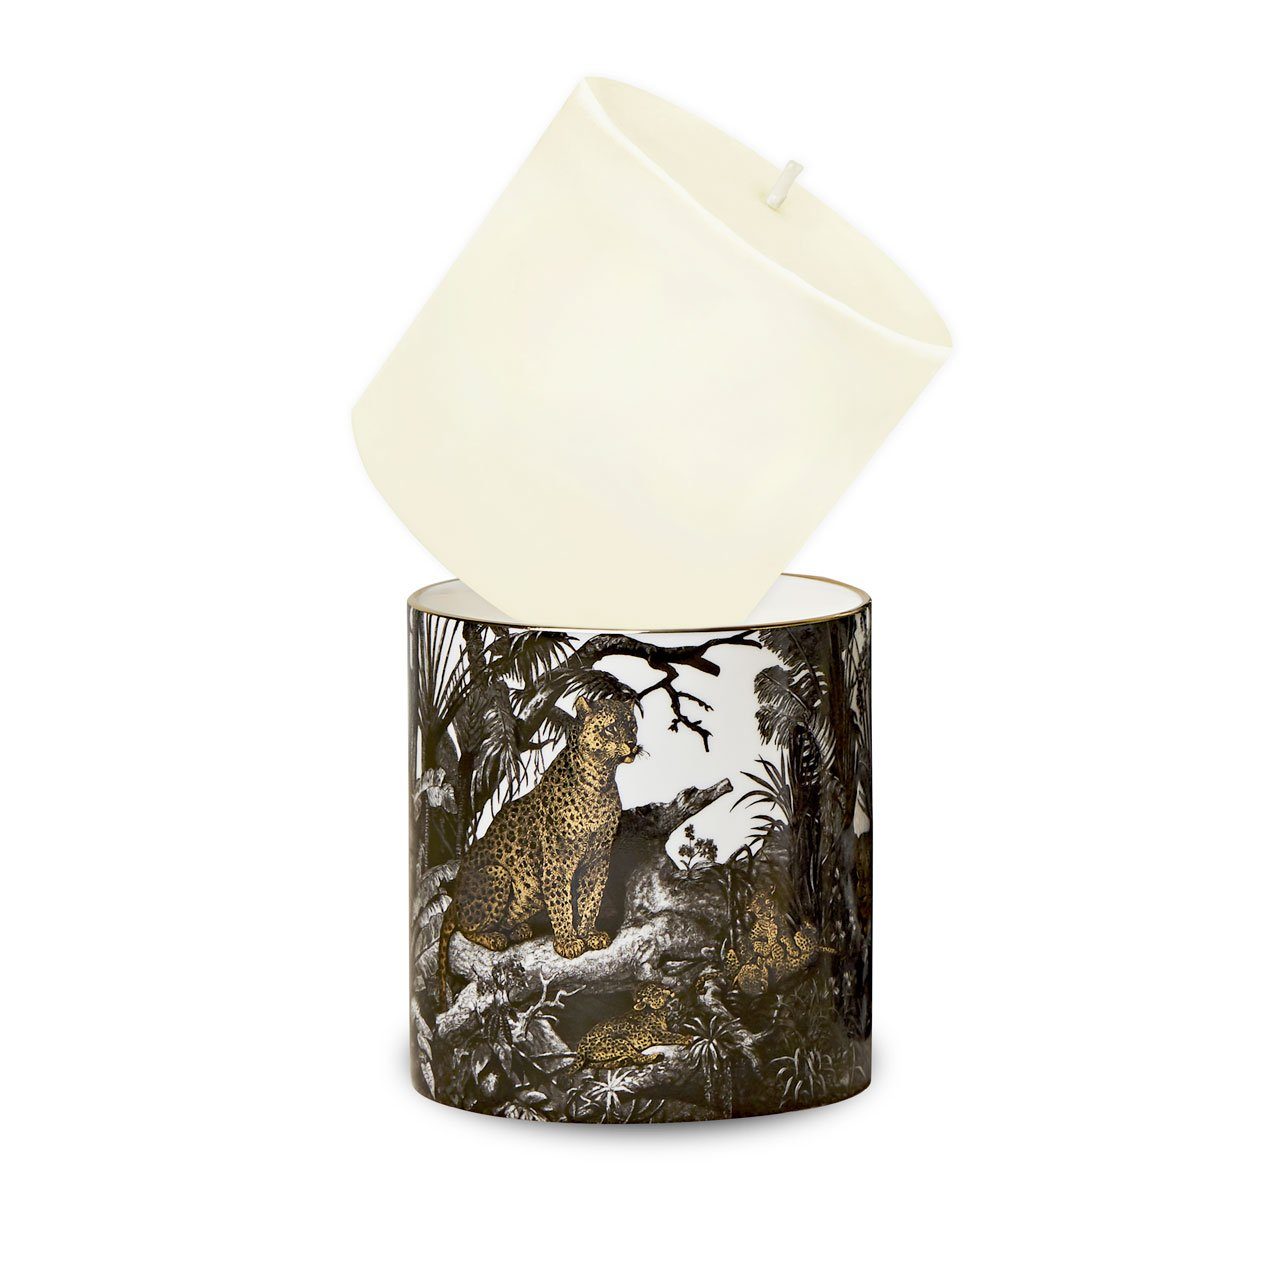 Refill for The Jungle Ceramic Candle